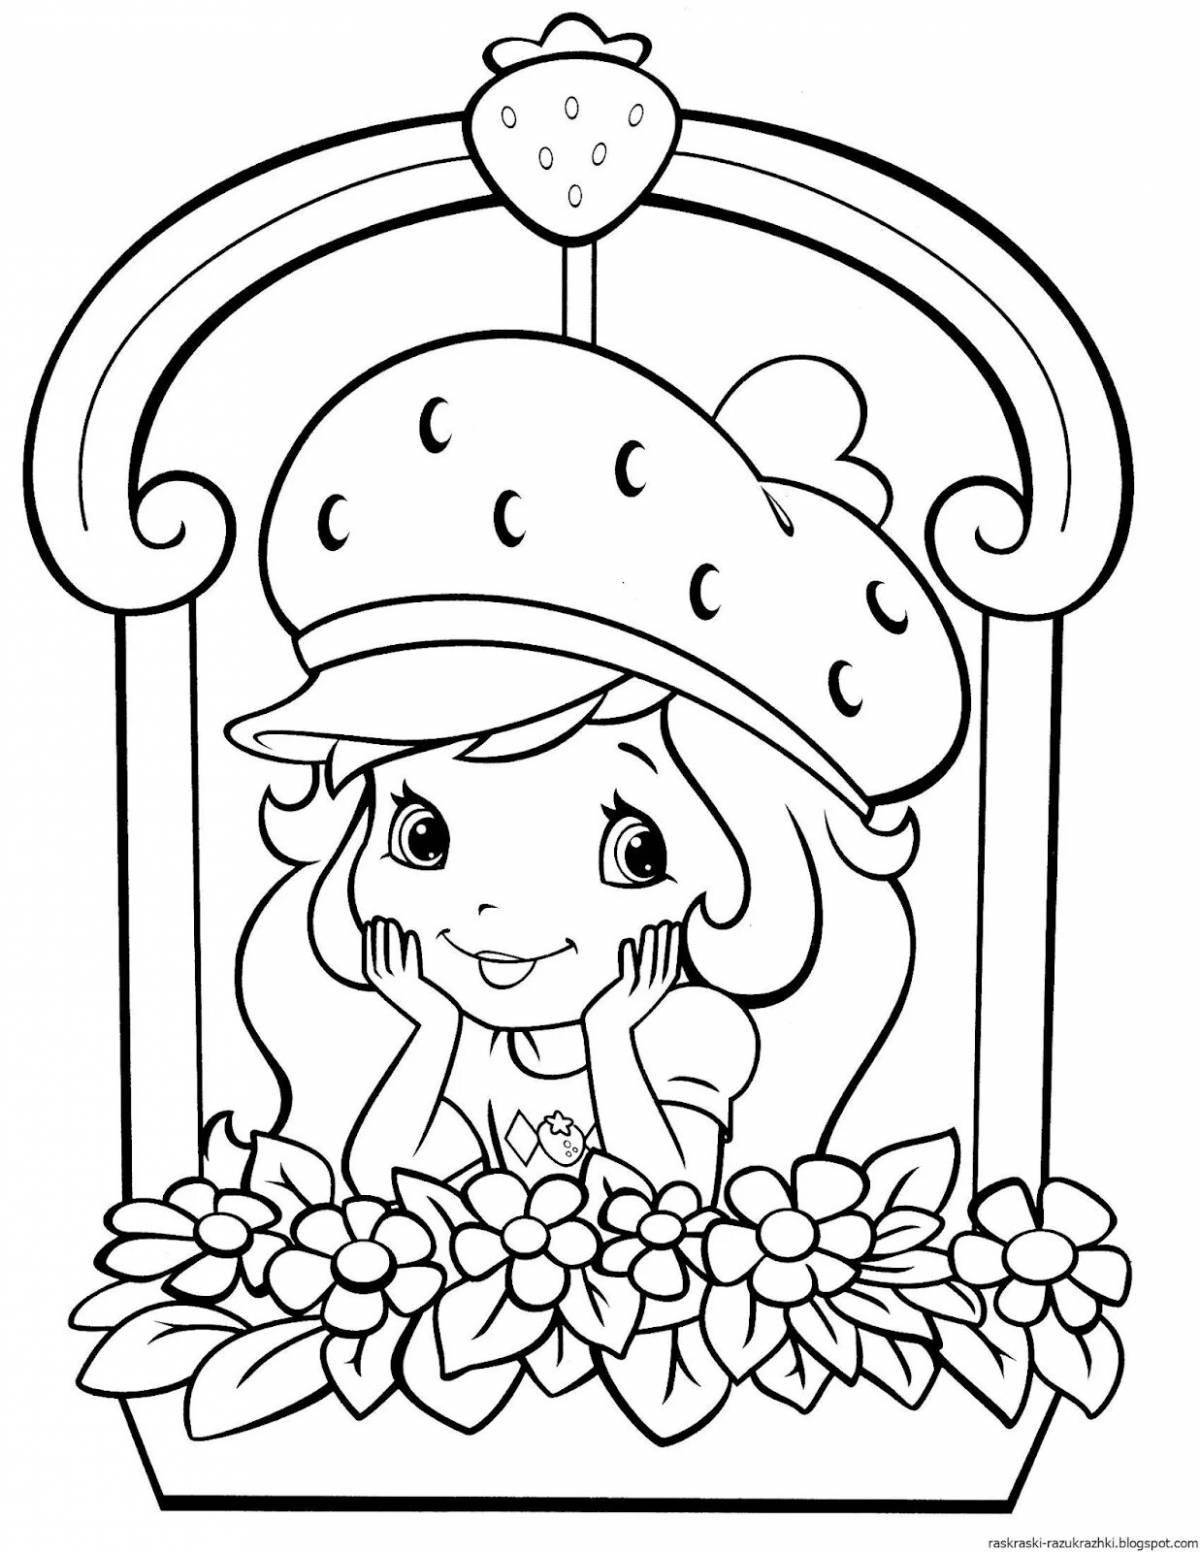 Charming coloring 6 for girls